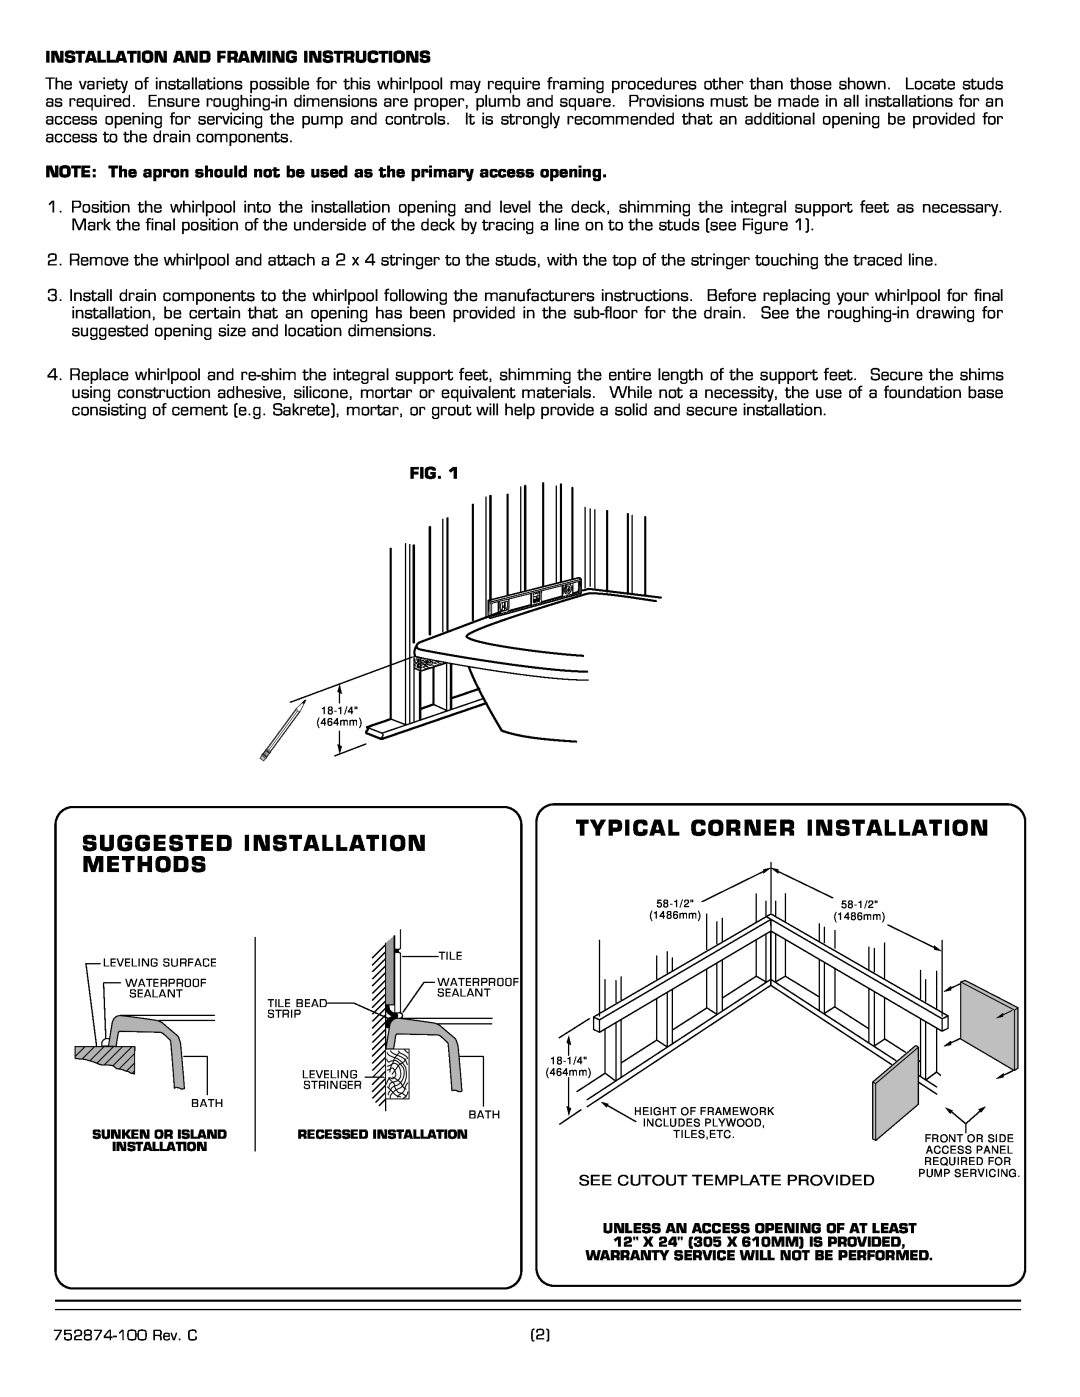 American Standard 2775E SERIES installation instructions Suggested Installation Methods, Typical Corner Installation, Fig 